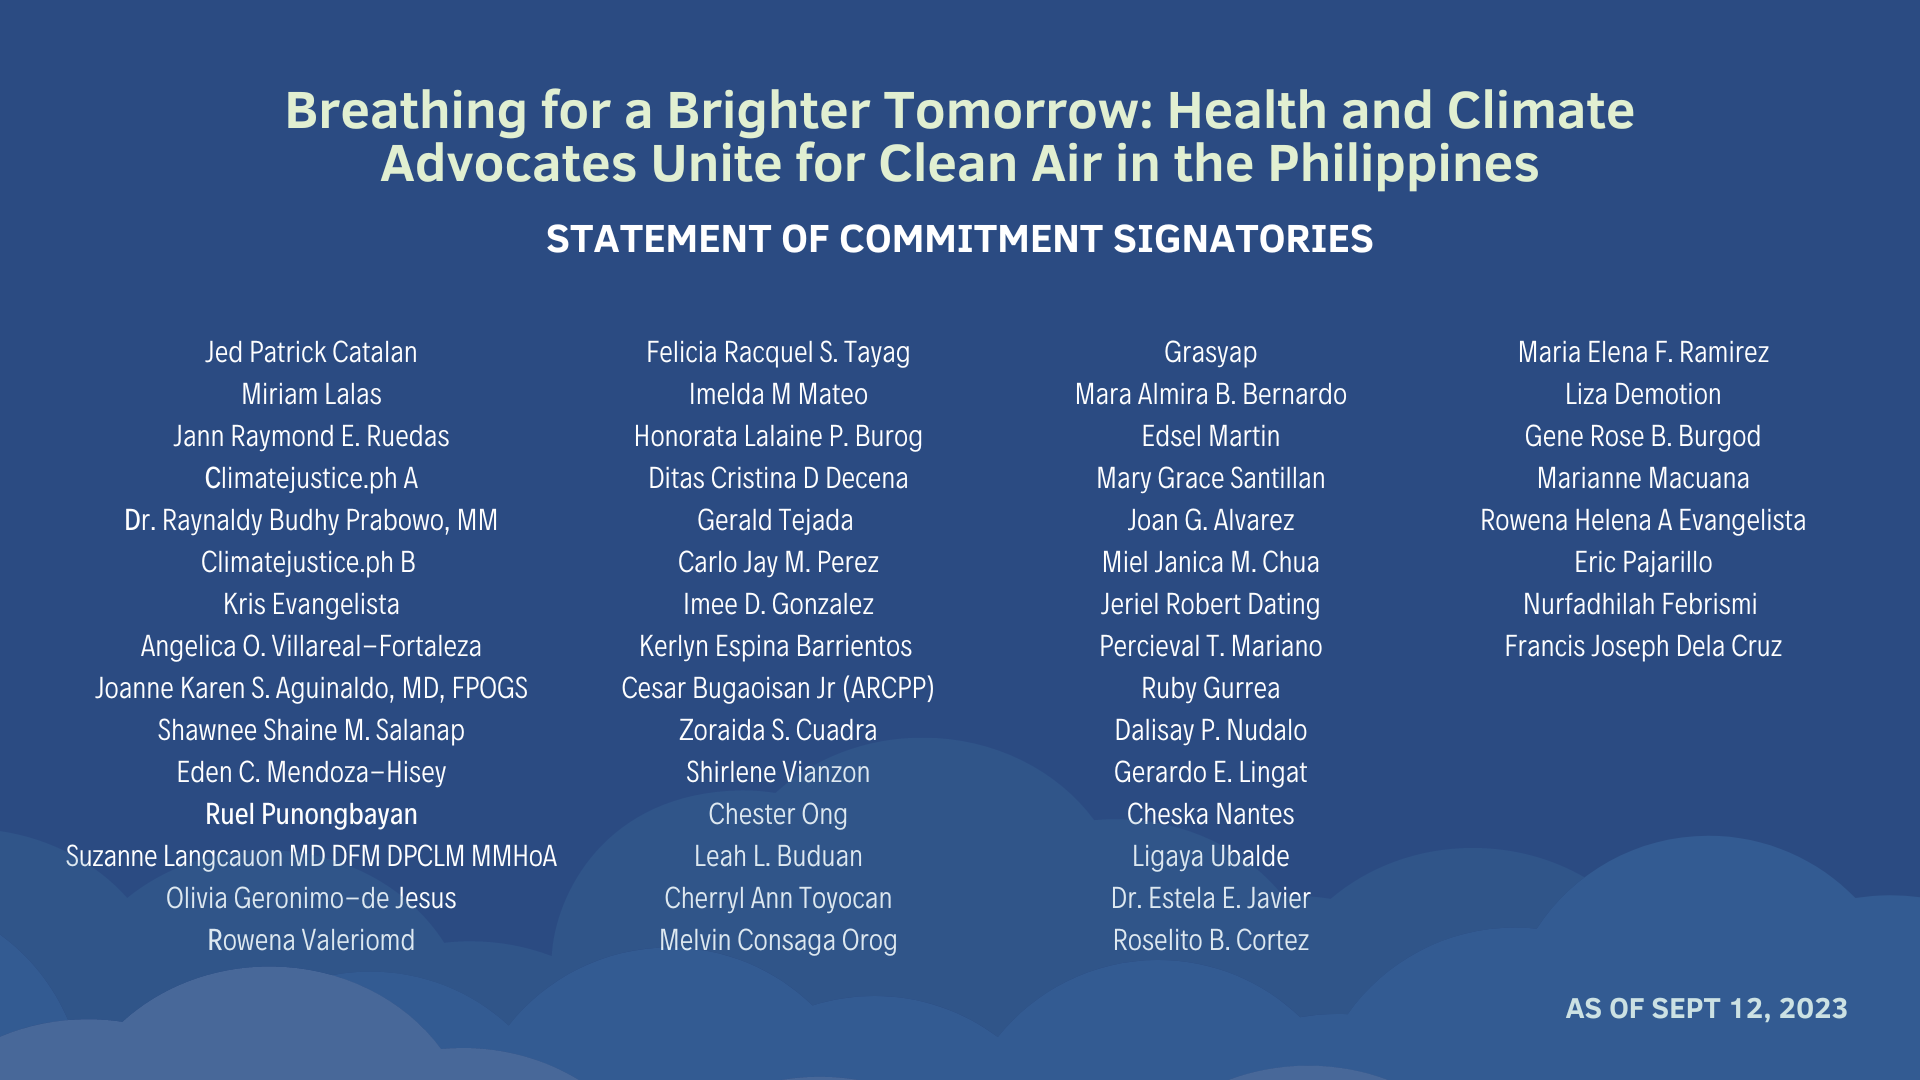 HACCAP Statement of Commitment - Signatories - as of Sept 12, 2023